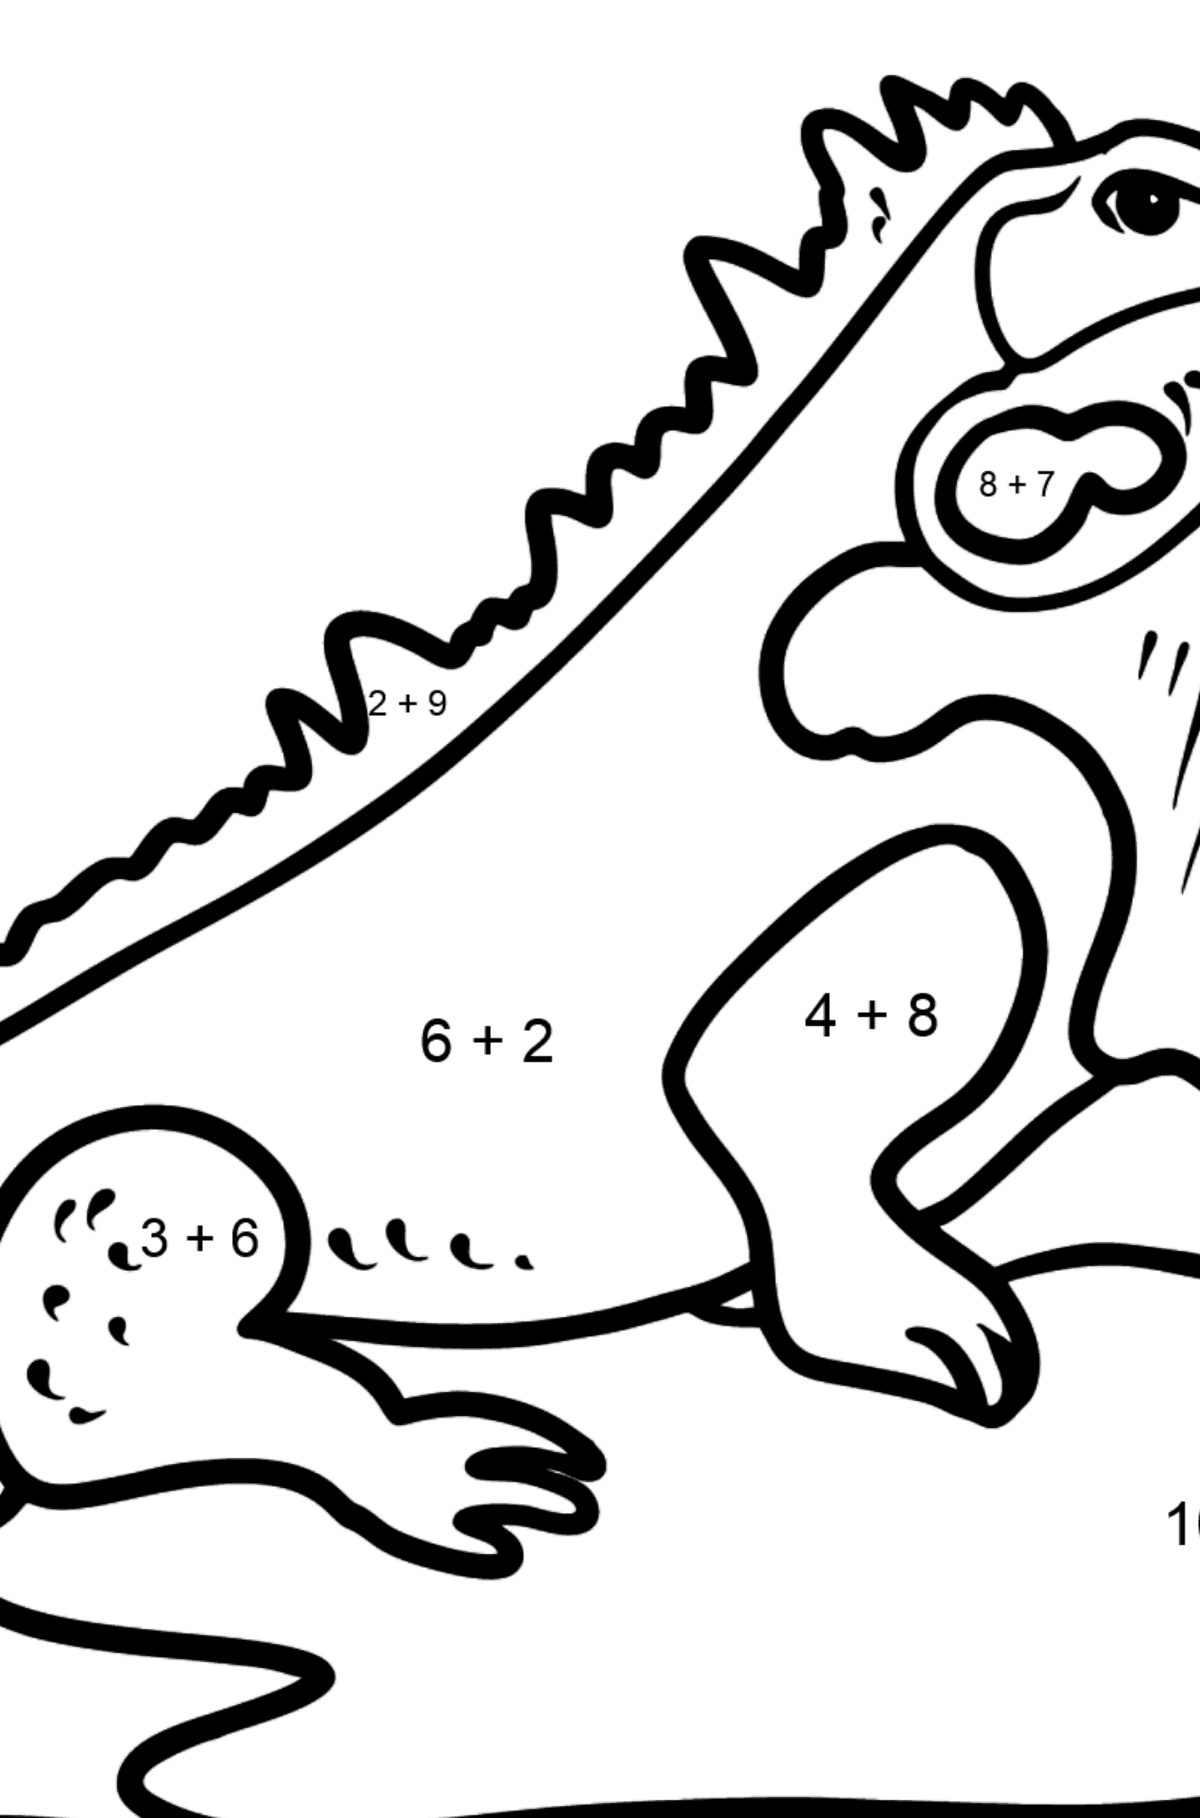 Spanish Letter I coloring pages - IGUANA - Math Coloring - Addition for Kids